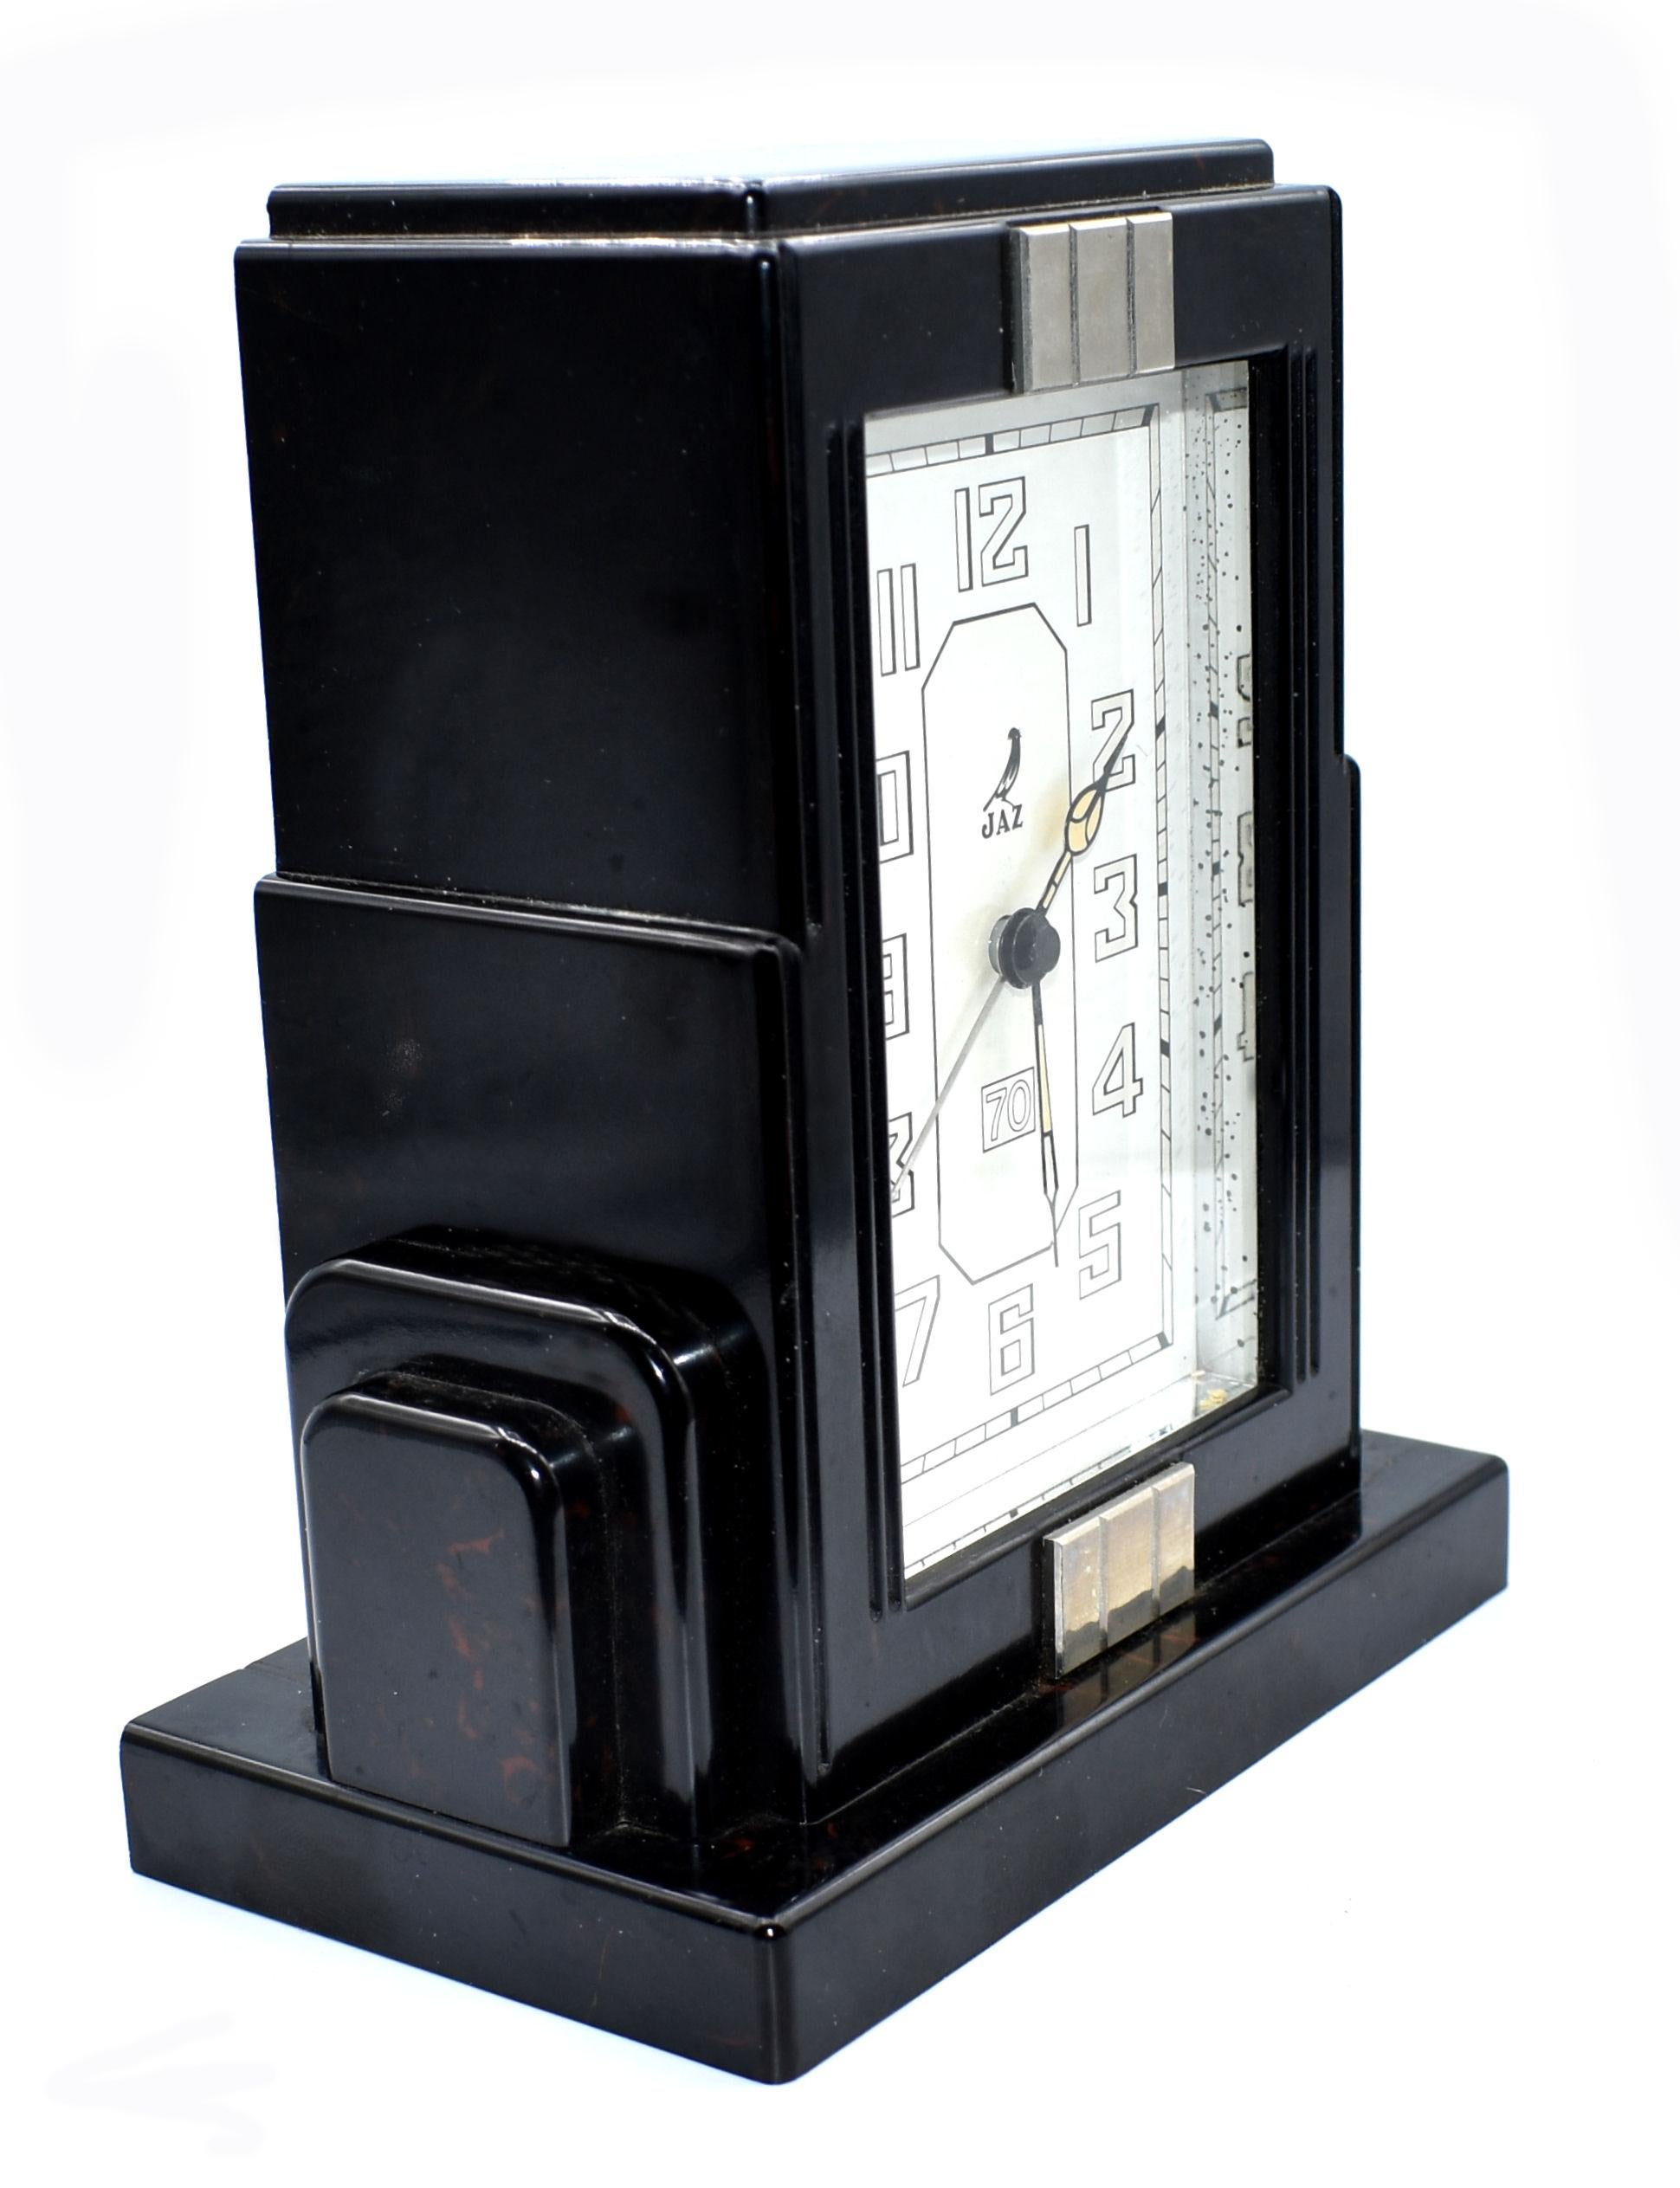 Fabulous Art Deco clock by JAZ a French clock maker. This clock is black bakelite and a not unusual colorway not often found with a wonderful skyscraper shaped casing. The condition of the face is particularly good showing little to no signs of it's